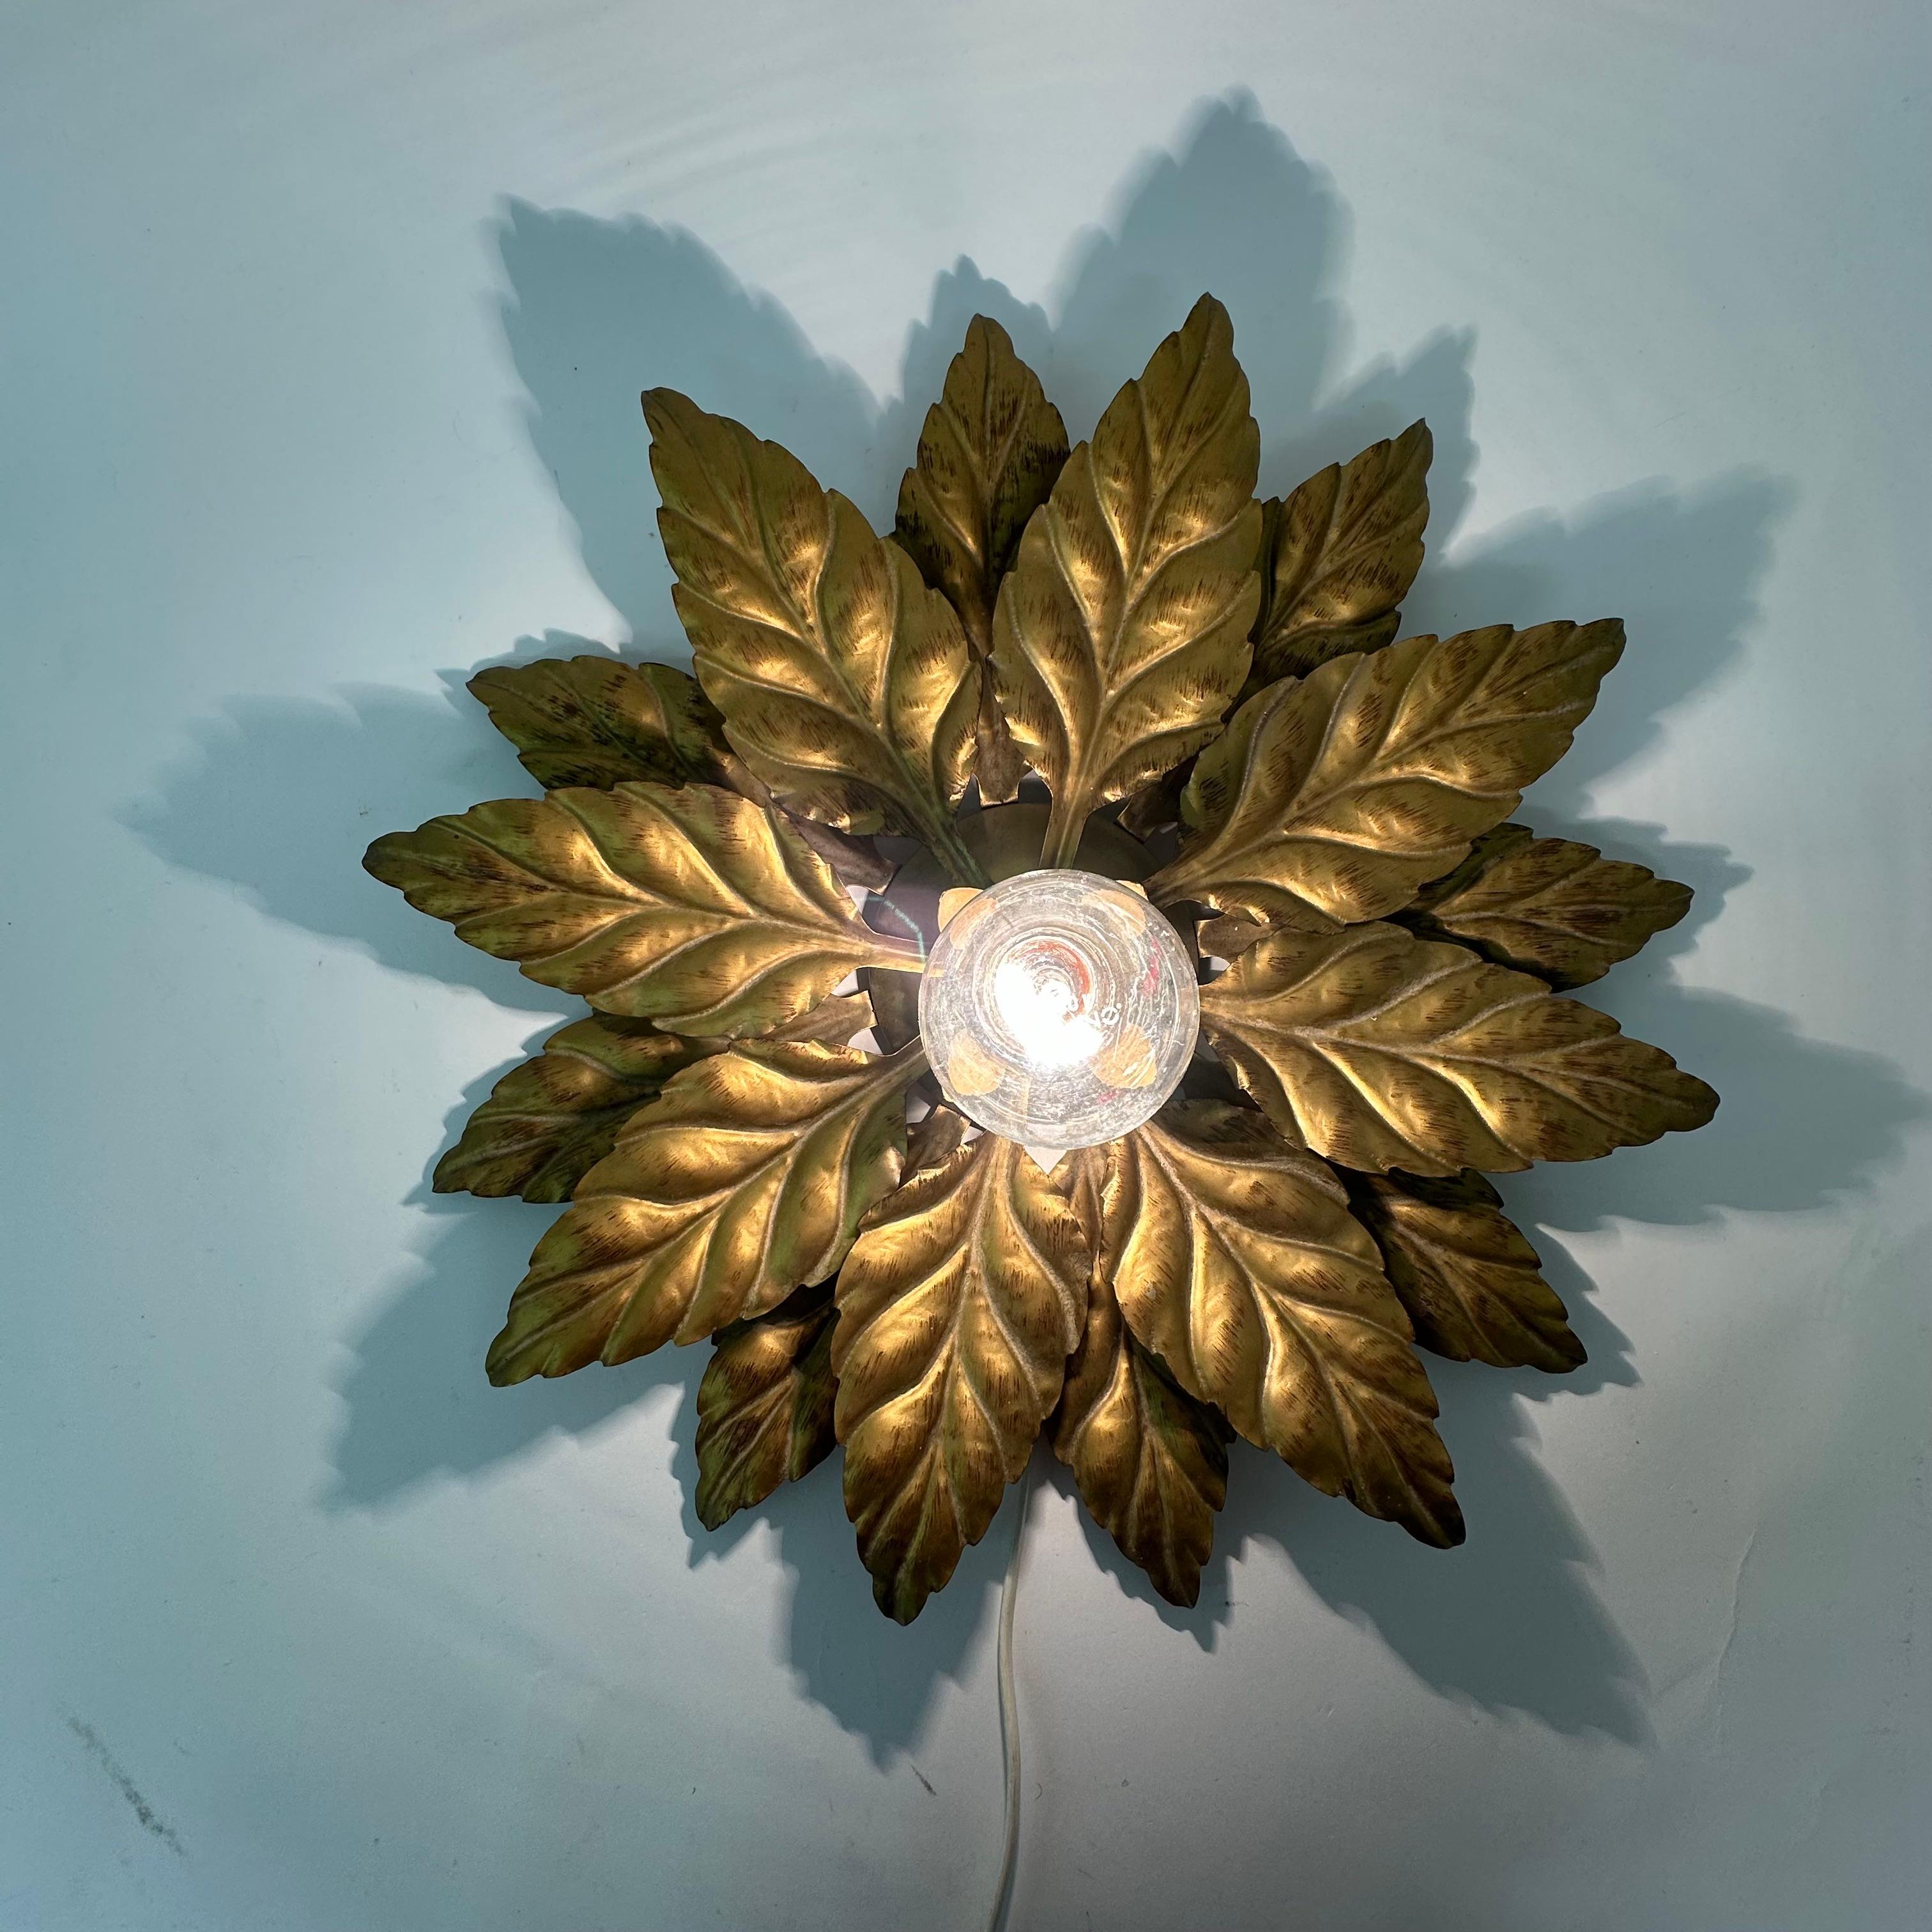 Hans Kögl flush mount / wall lamp leafs , 1970s , Germany

Dimensions: 45cm Diameter, 15 cm Height
Period: 1970’s
Condition: Good
Period: 1970’s